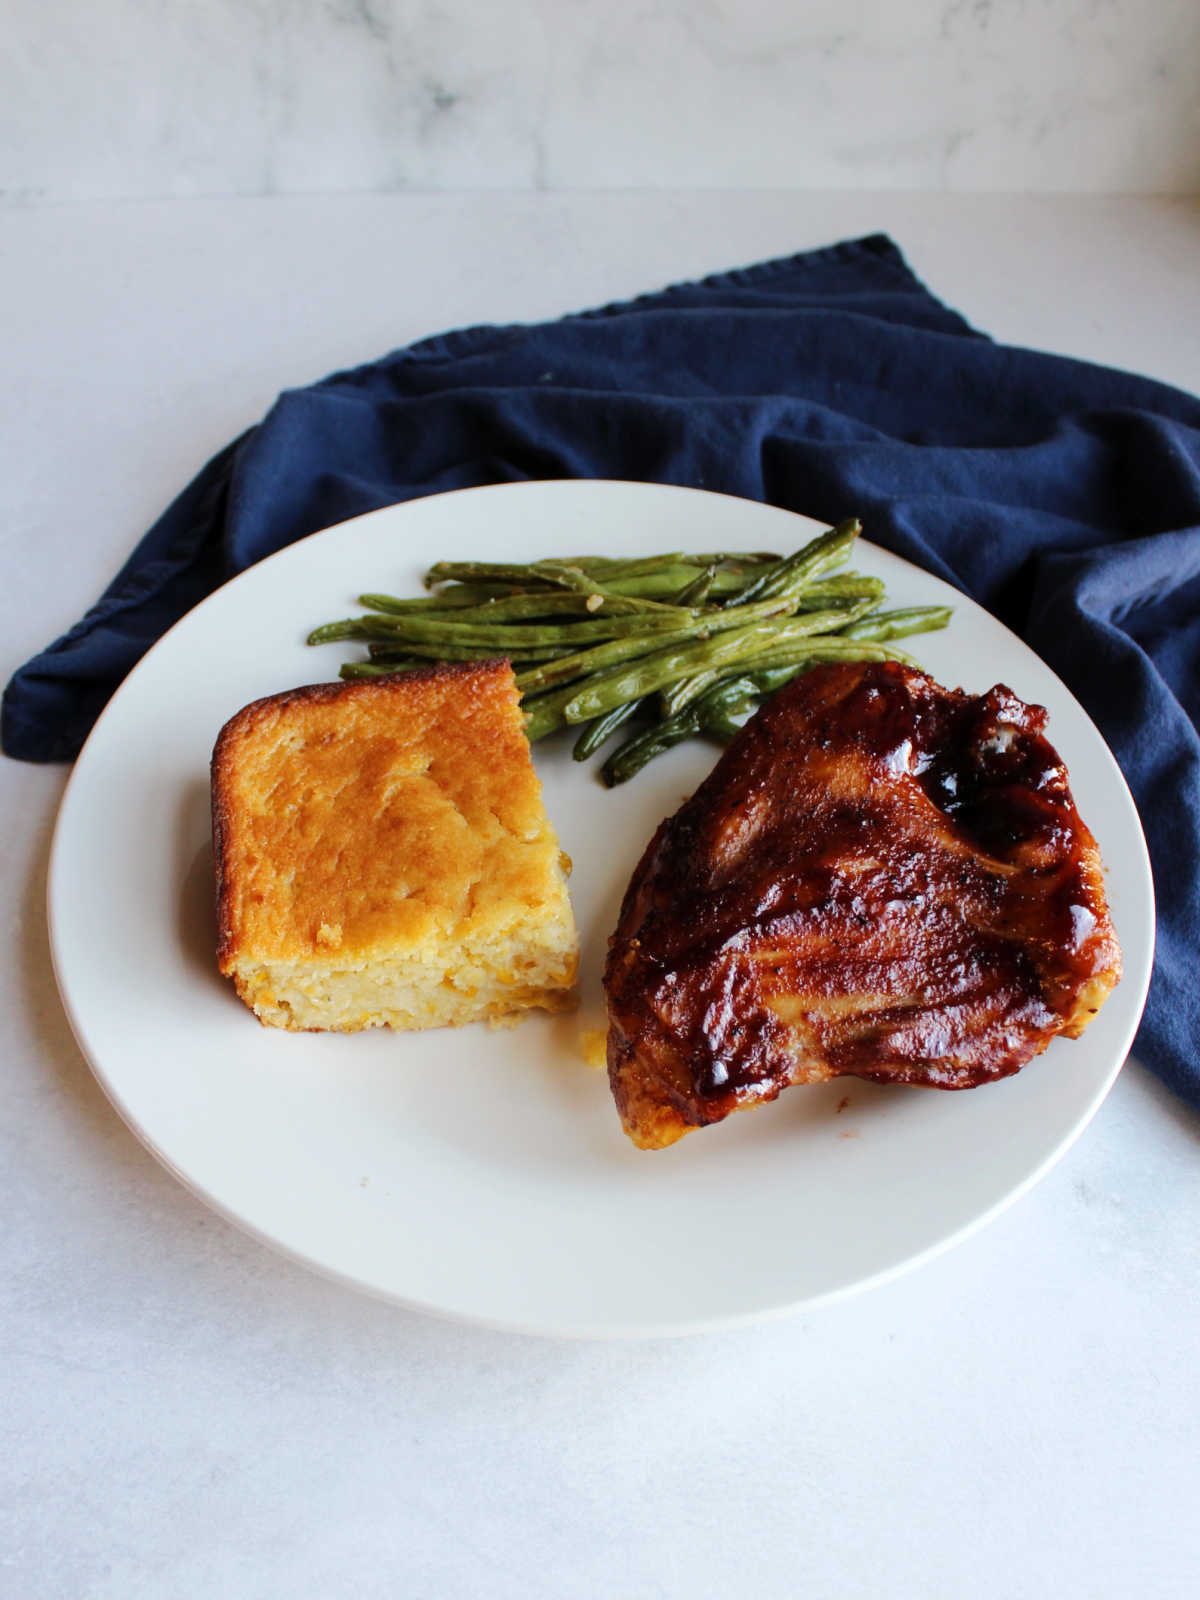 square piece of corn pudding on plate with bbq chicken and green beans ready to eat.